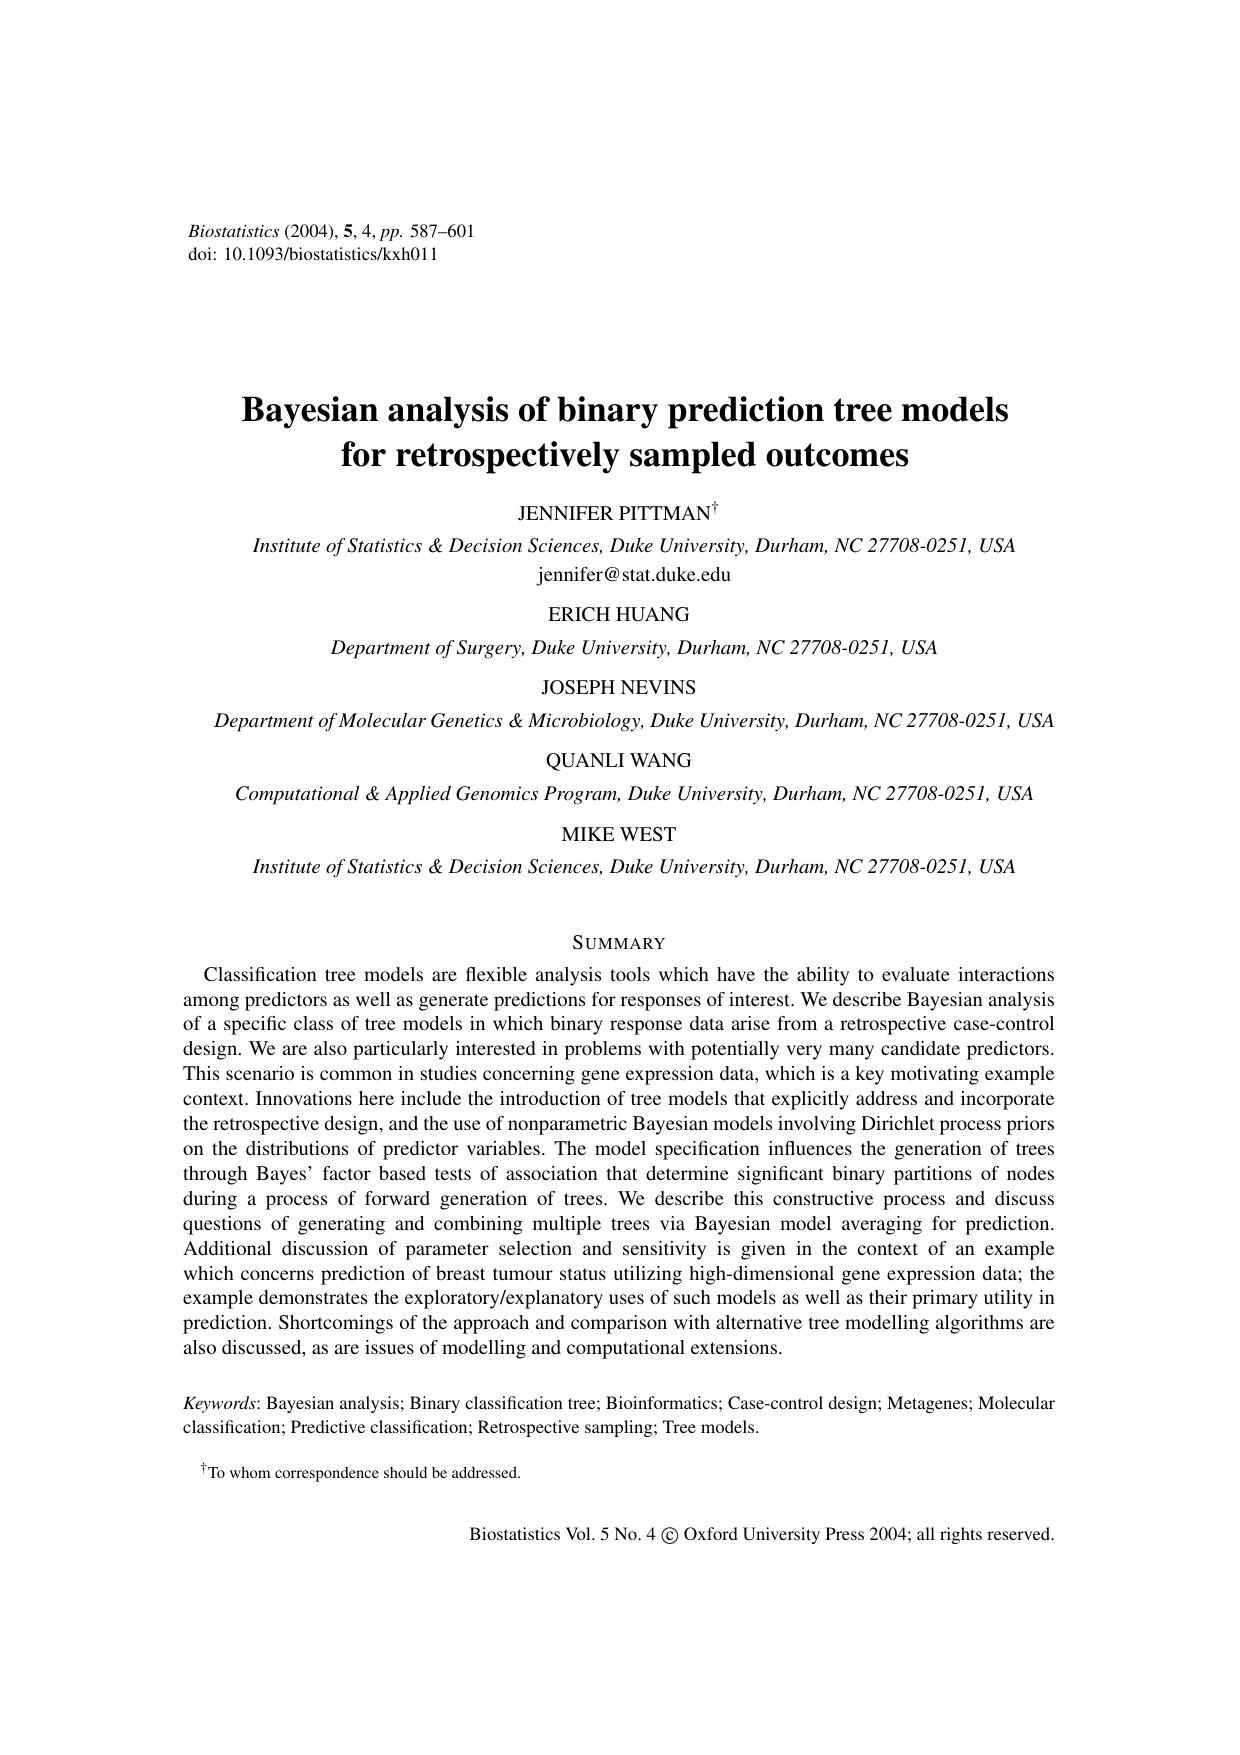 Bayesian analysis of binary prediction tree models for retrospectively sampled outcomes - Paper